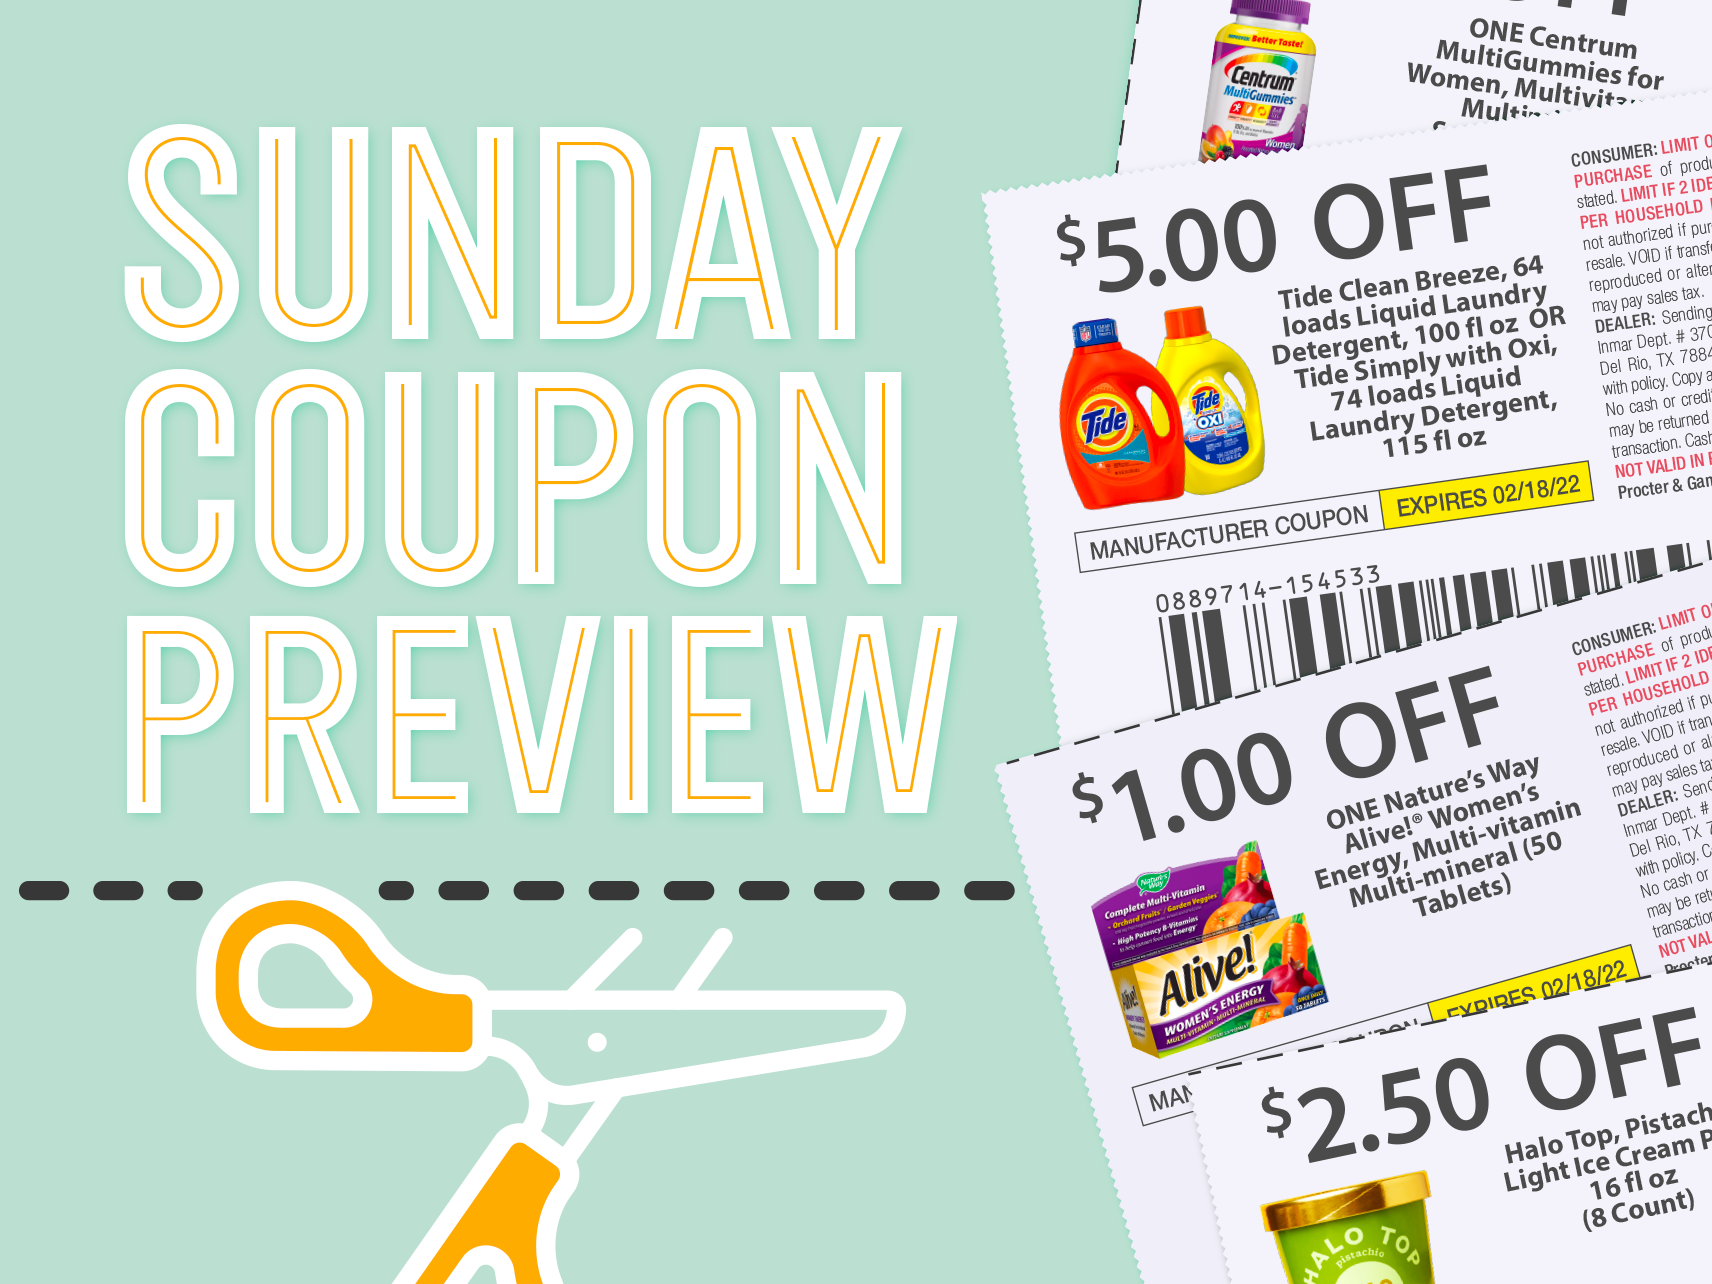 Sunday Coupon Preview For 7/17 – Two Inserts